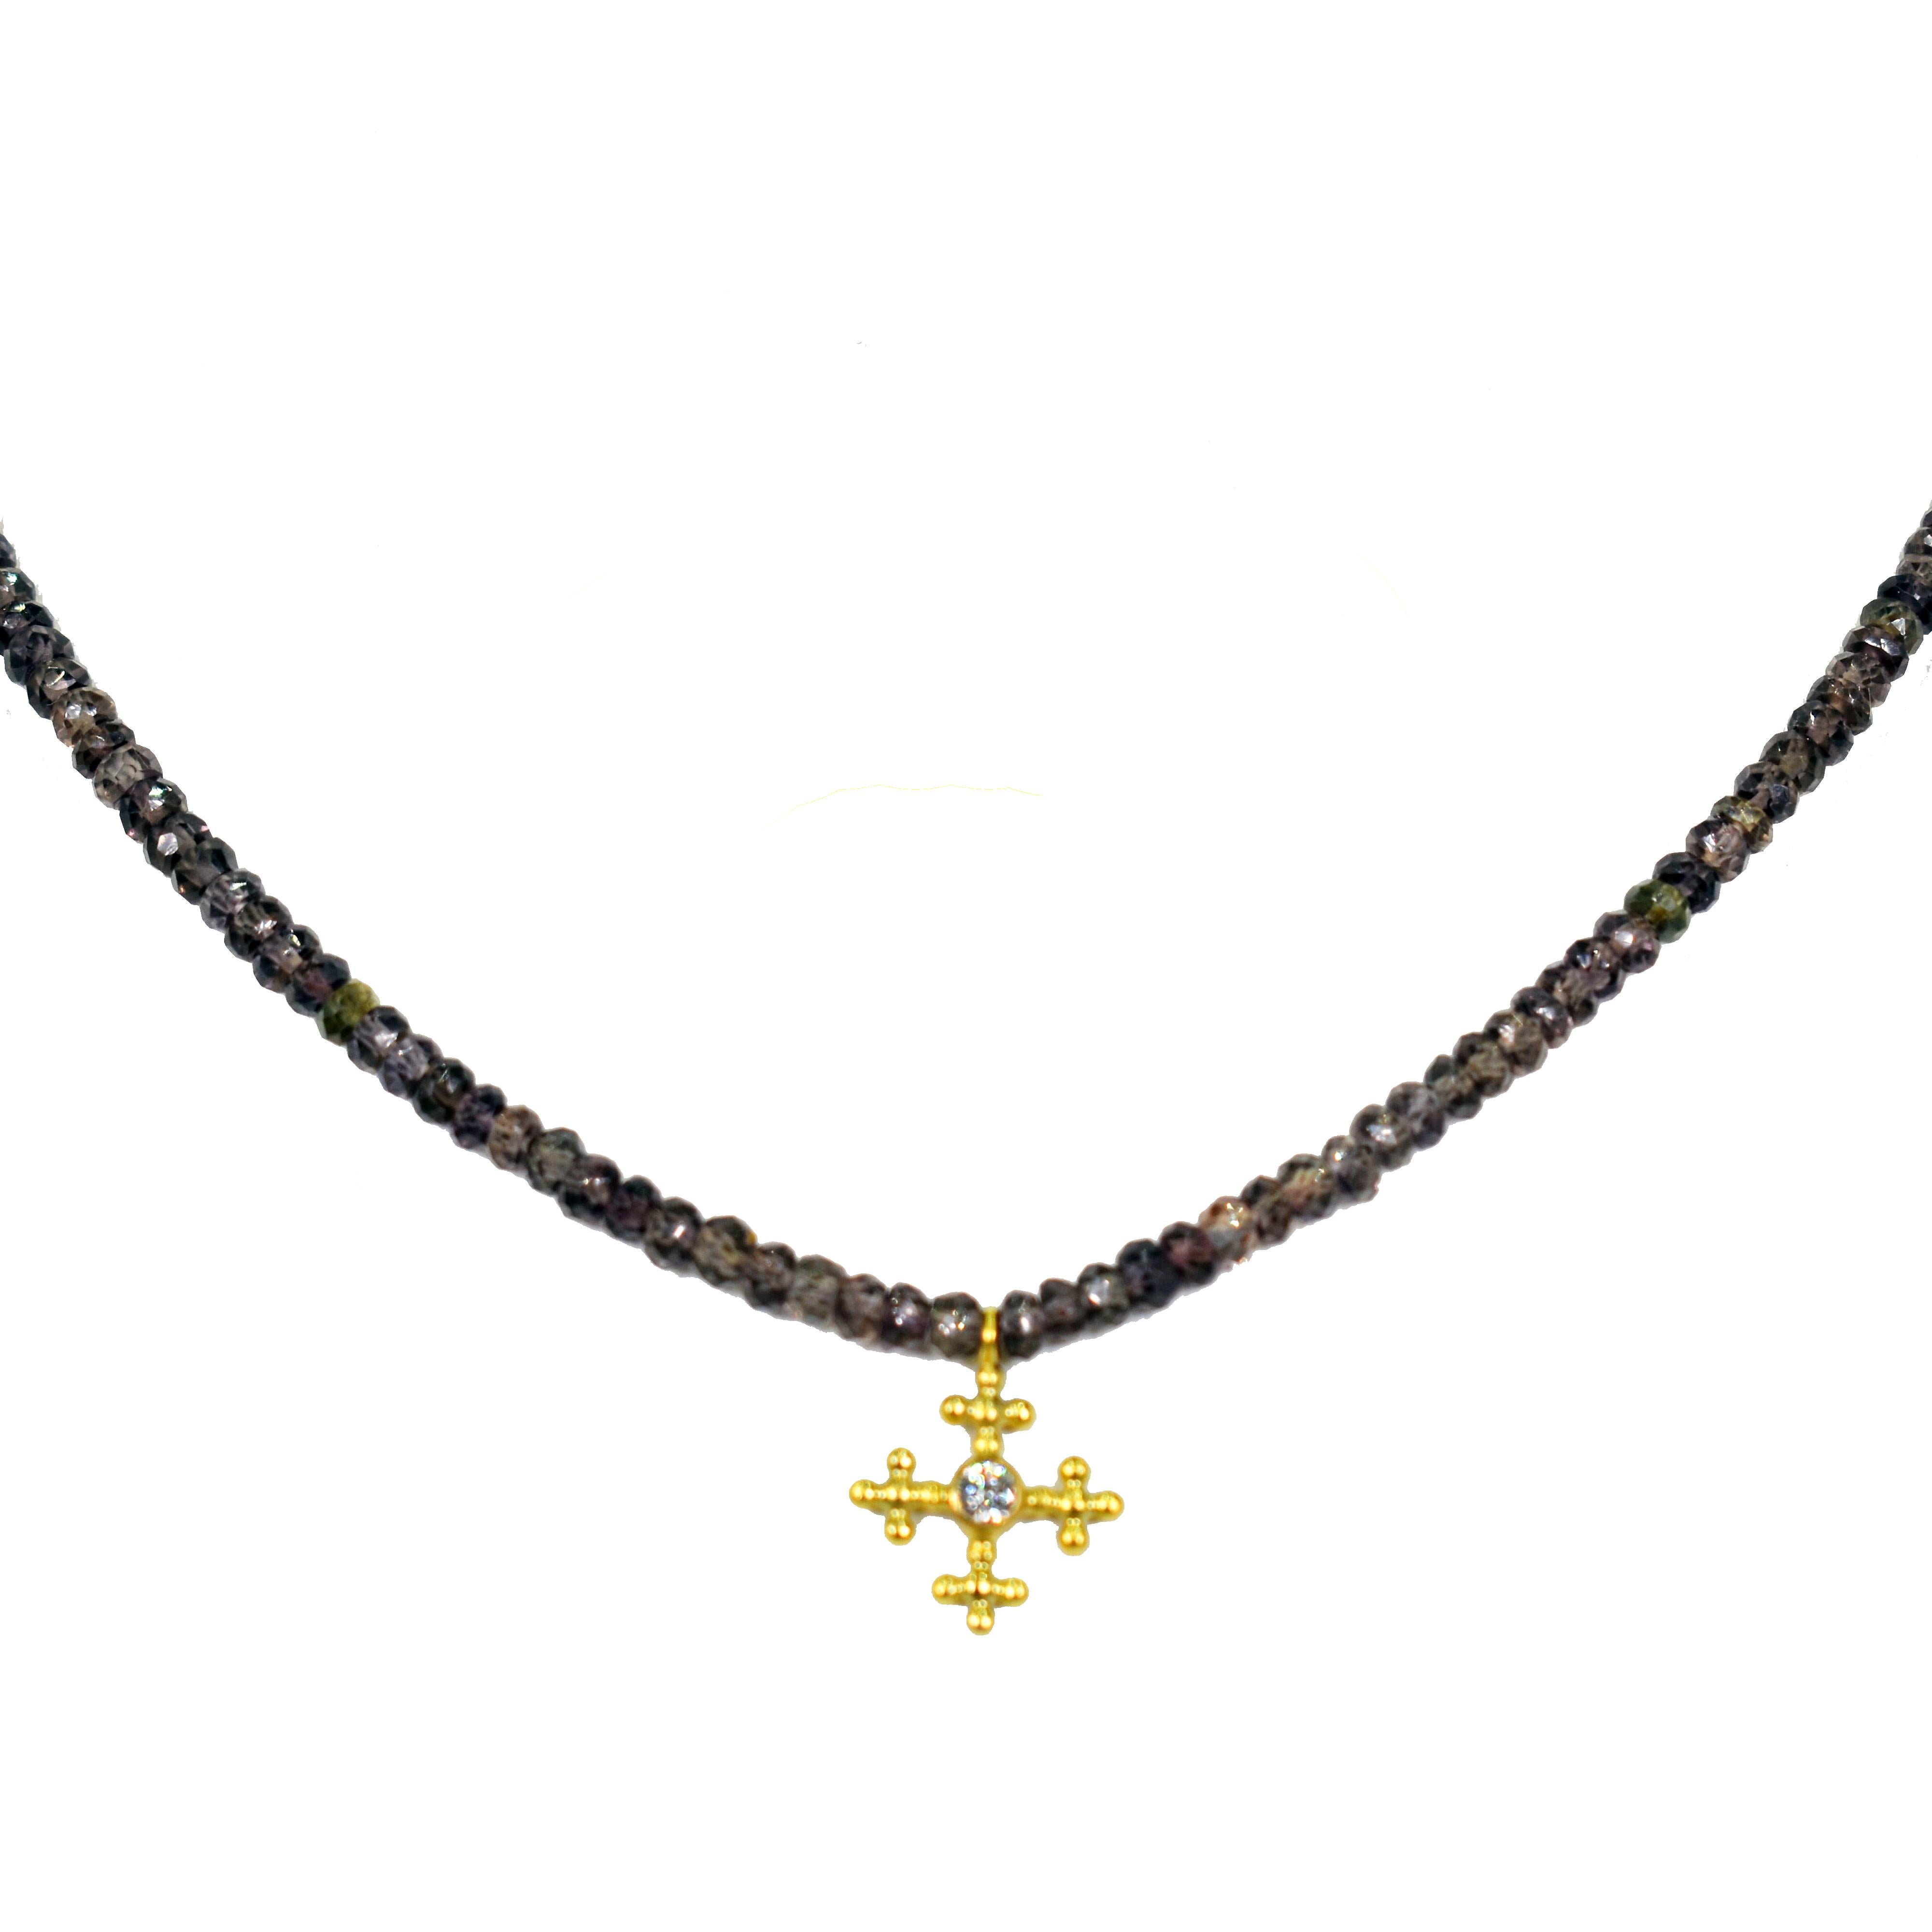 18k yellow gold and white diamond (0.06 carat, G-H, SI1) cross pendant on a faceted, greenish brown Sapphire beaded necklace. Necklace is finished with an 18k gold hook closure. Beaded Sapphire necklace is 16.5 inches in length, and gold cross